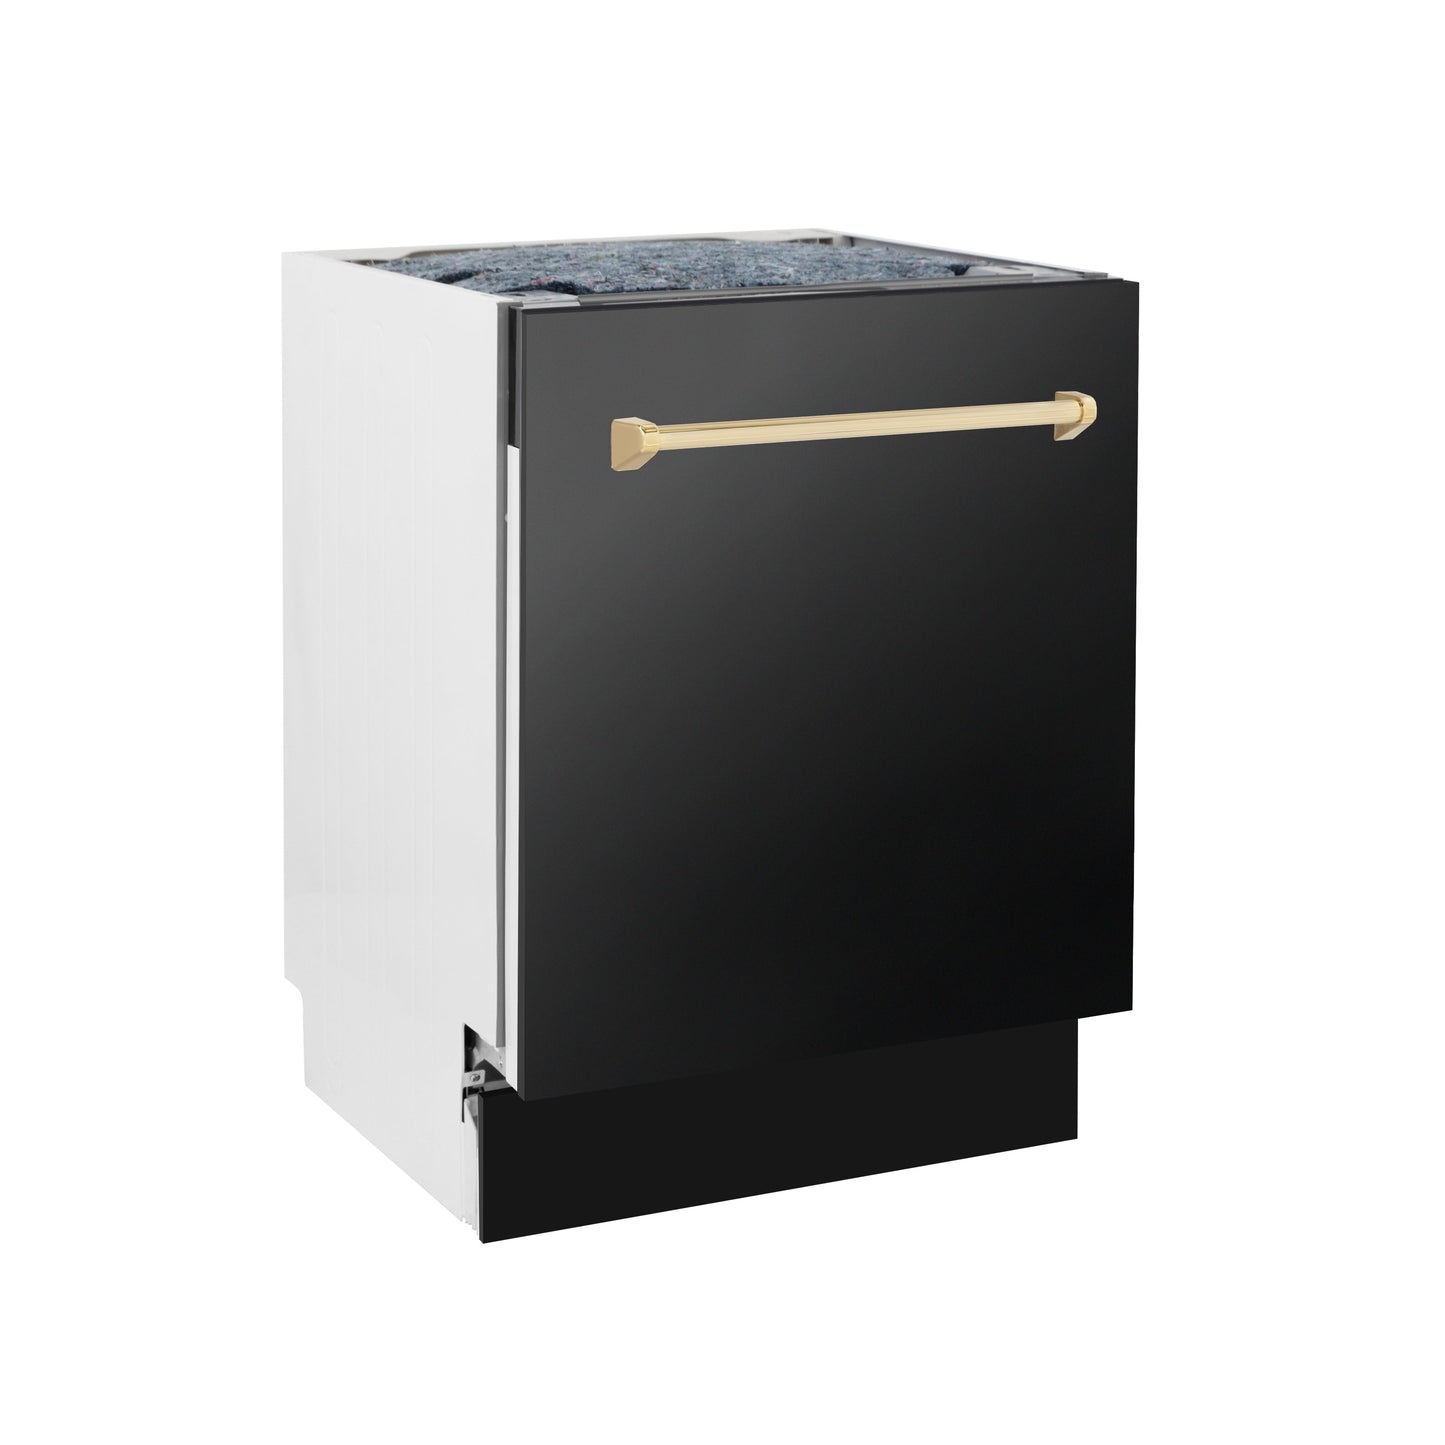 ZLINE Autograph Edition 24 in. 3rd Rack Top Control Tall Tub Dishwasher in Black Stainless Steel with Polished Gold Accent Handle, 51dBa (DWVZ-BS-24-G)